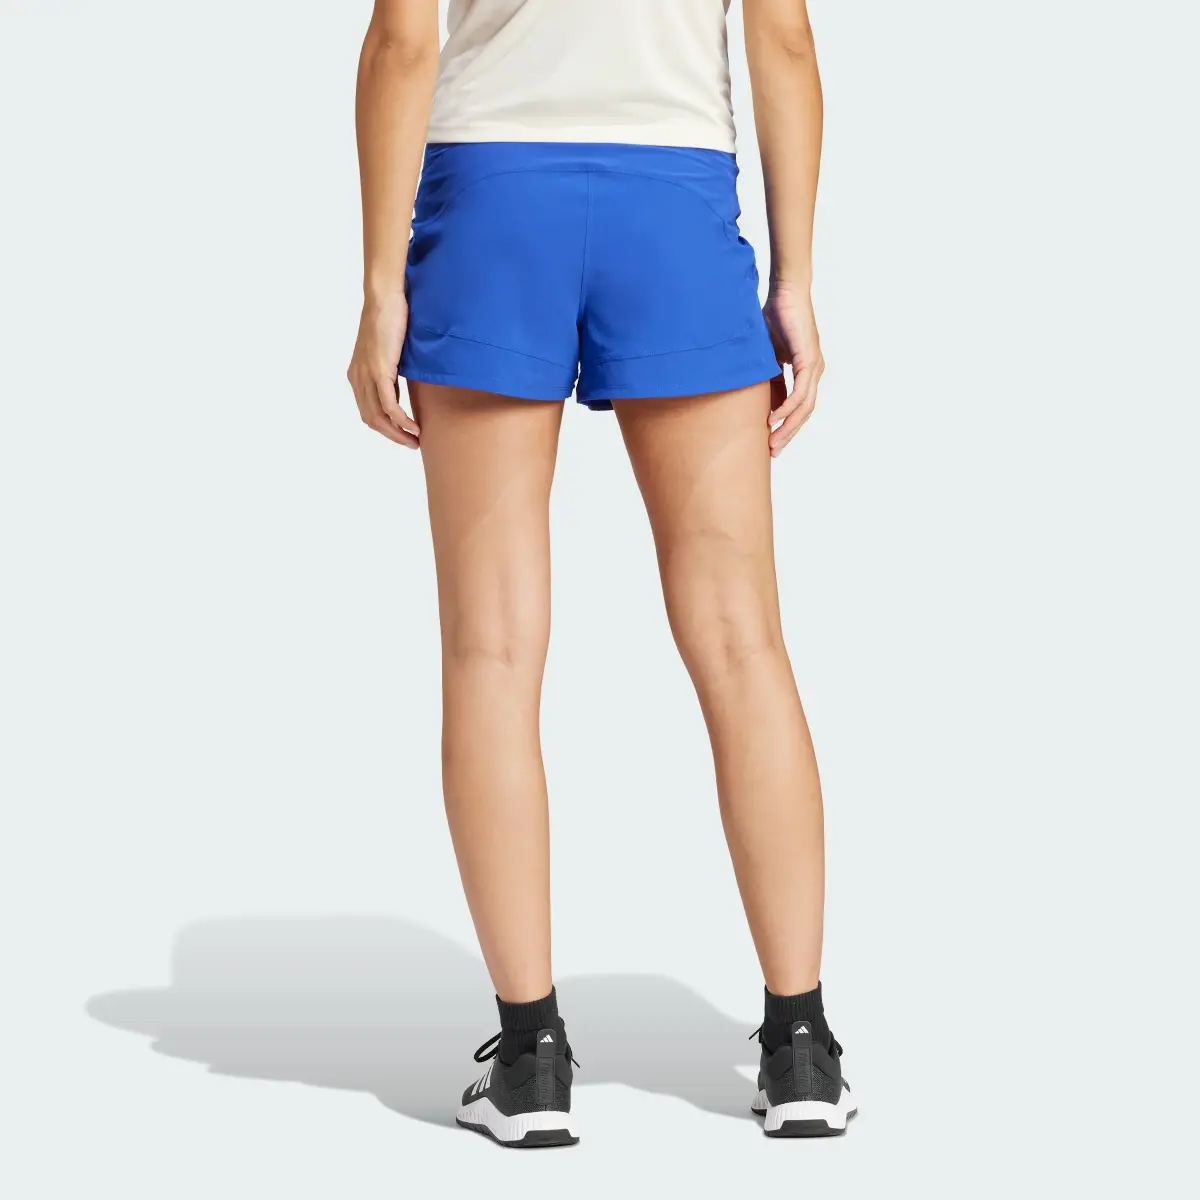 Adidas Pacer Woven Stretch Training Maternity Shorts – Umstandsmode. 2